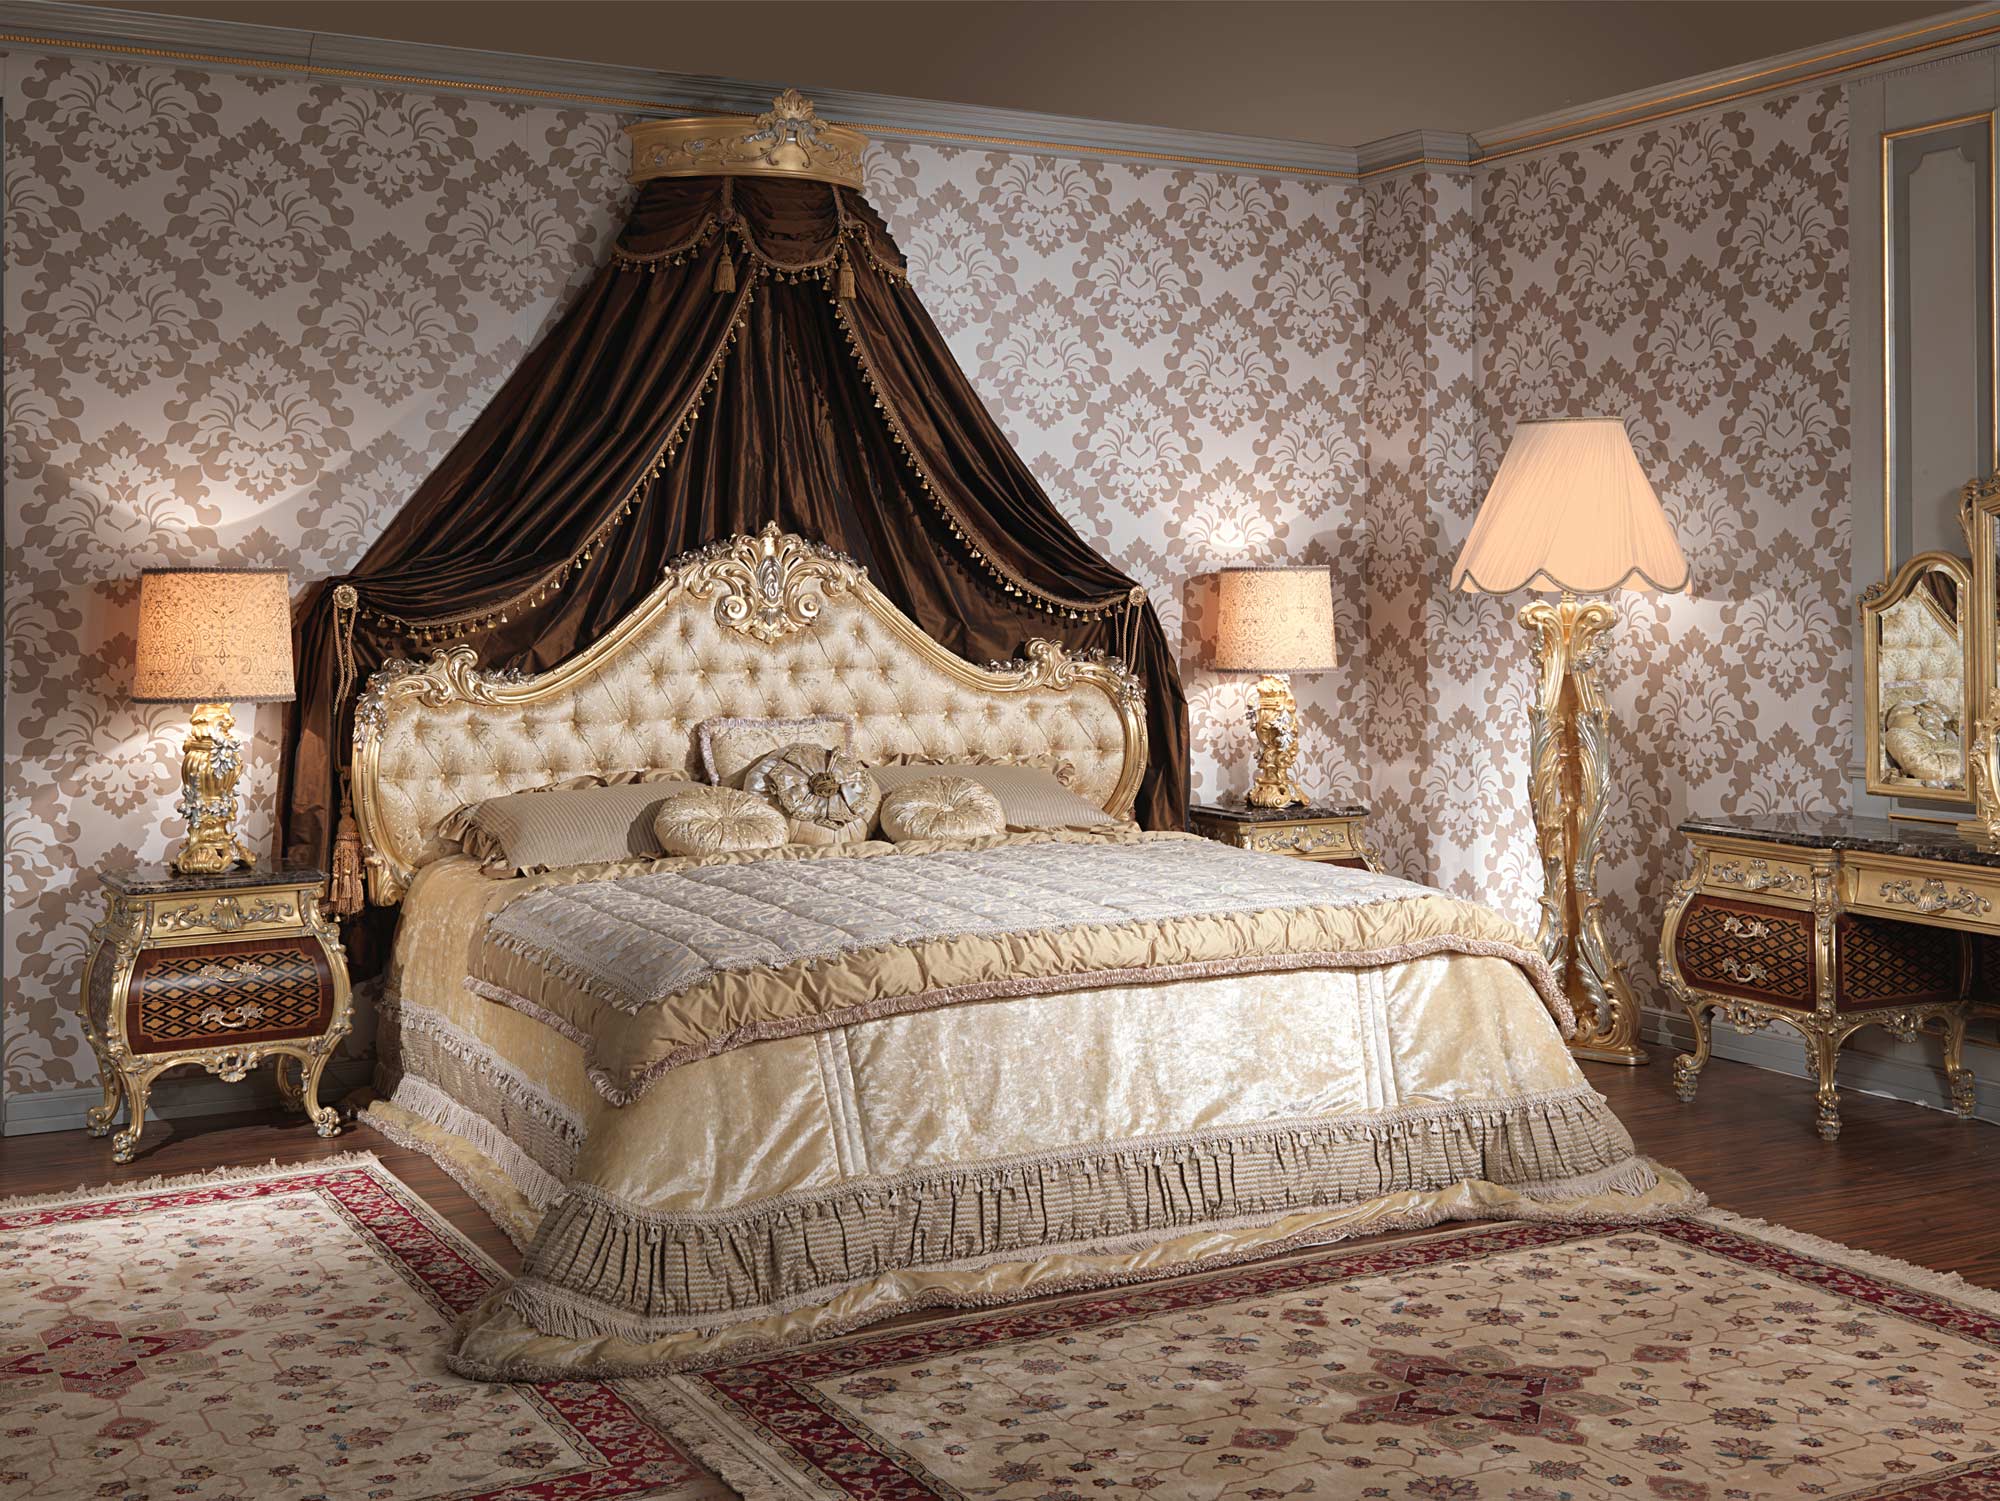 Luxury King Size Bed Emperador Gold Art, Luxury King Bed